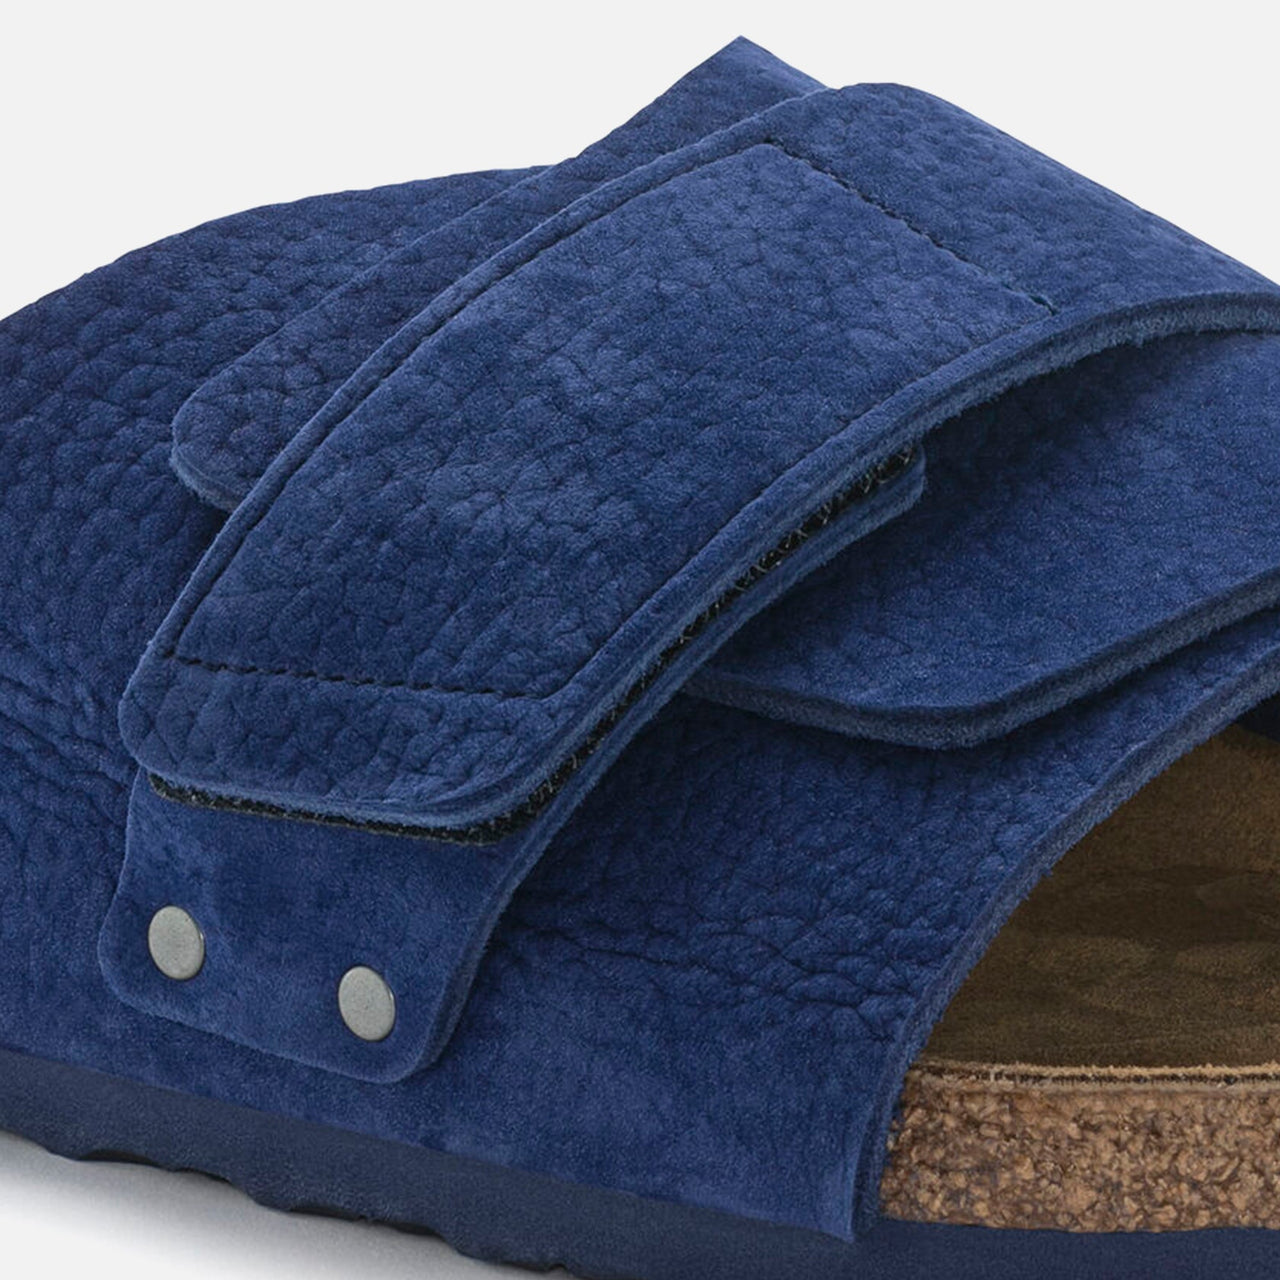 Comfortable and stylish Birkenstock Kyoto Suede Ultra Blue sandals for women